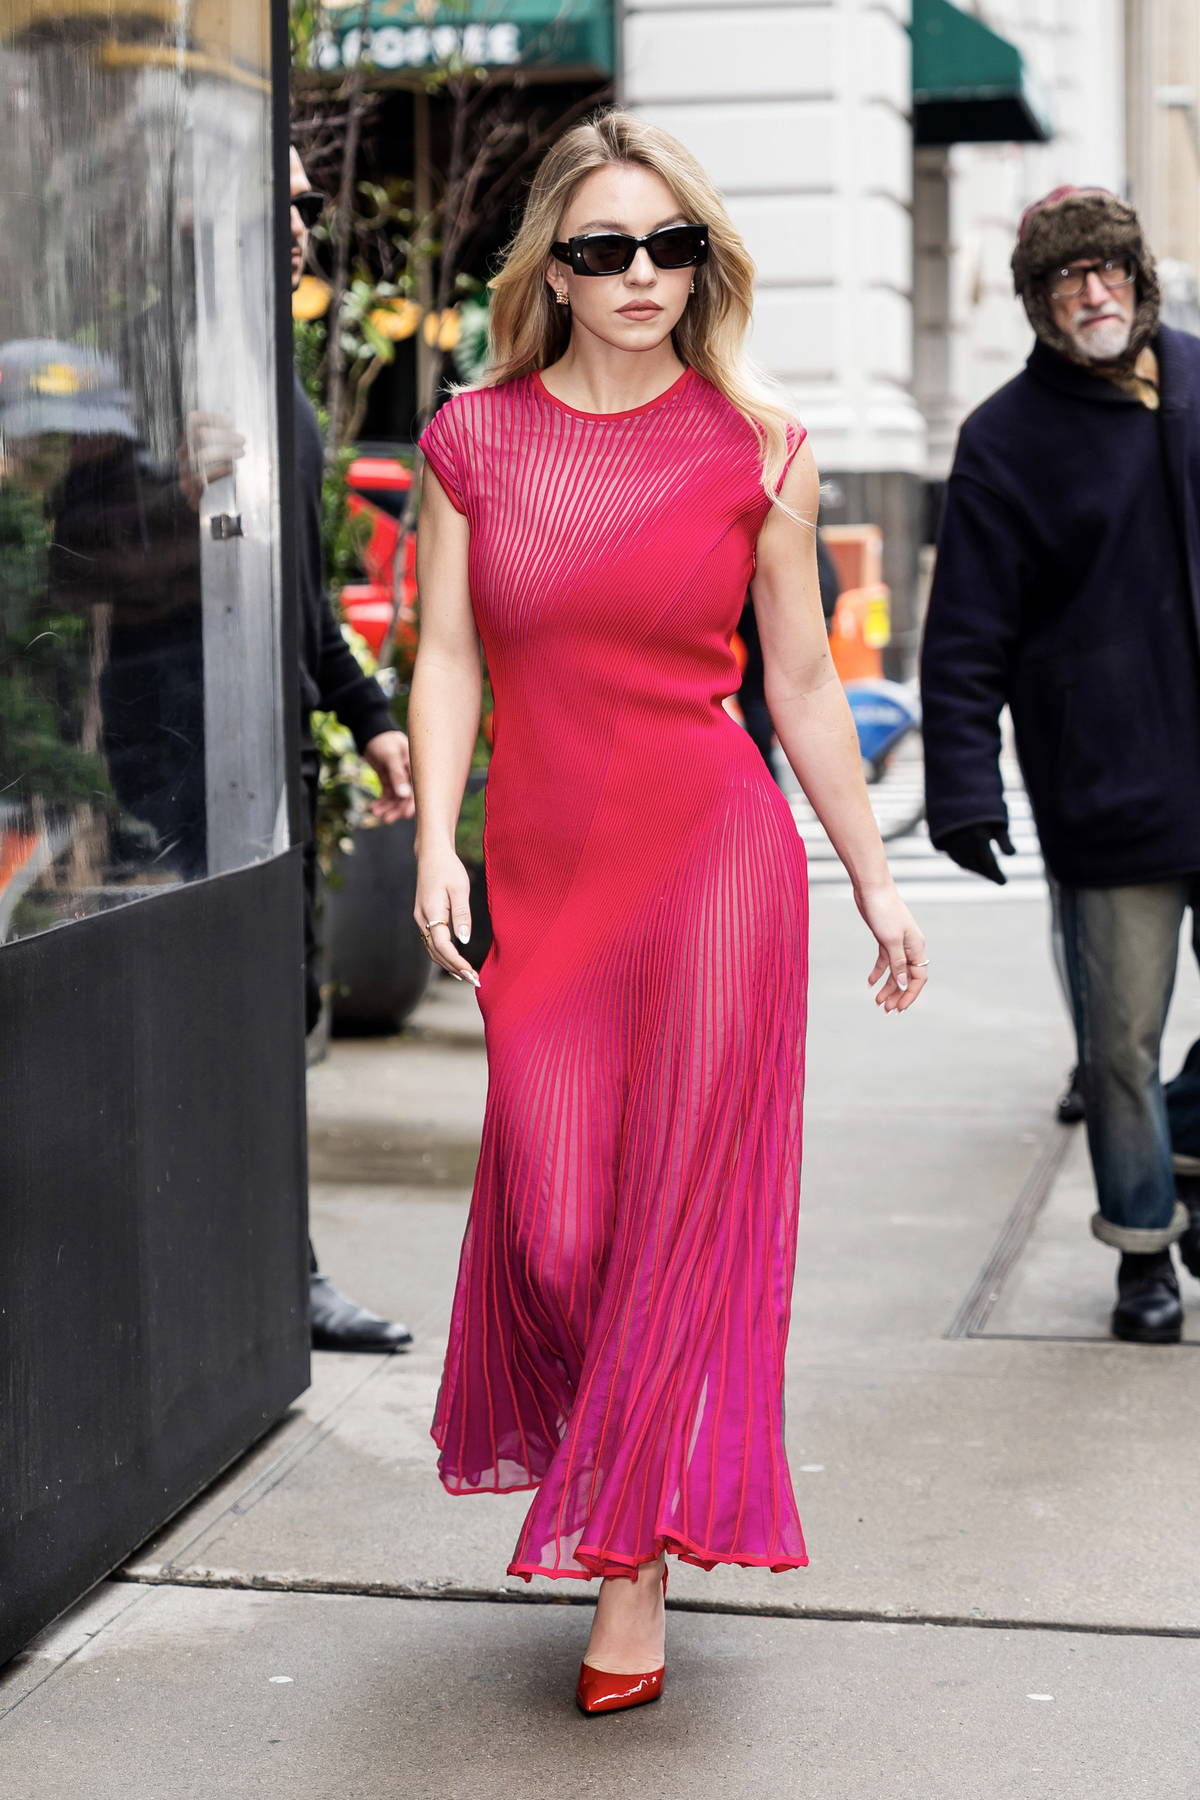 Sydney Sweeney looks striking in a hot pink dress while attending a Bai event in New York City